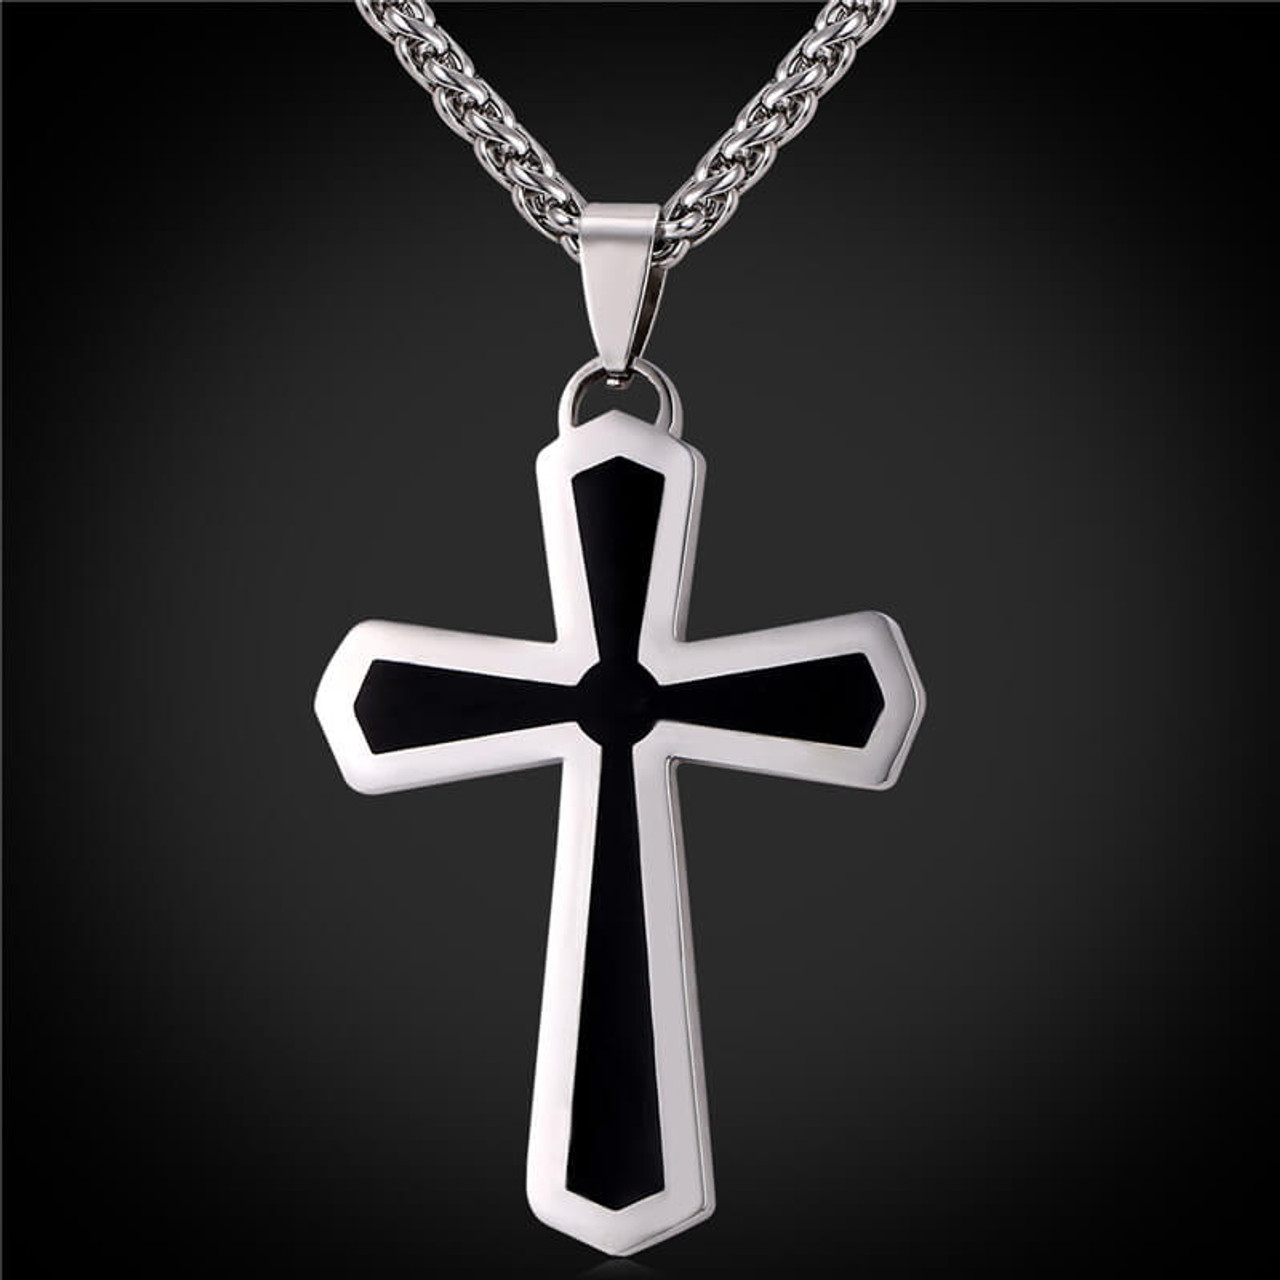 Men's Stainless Steel Cross Pendant - Best Accents Stainless Steel Necklace Mens Cross